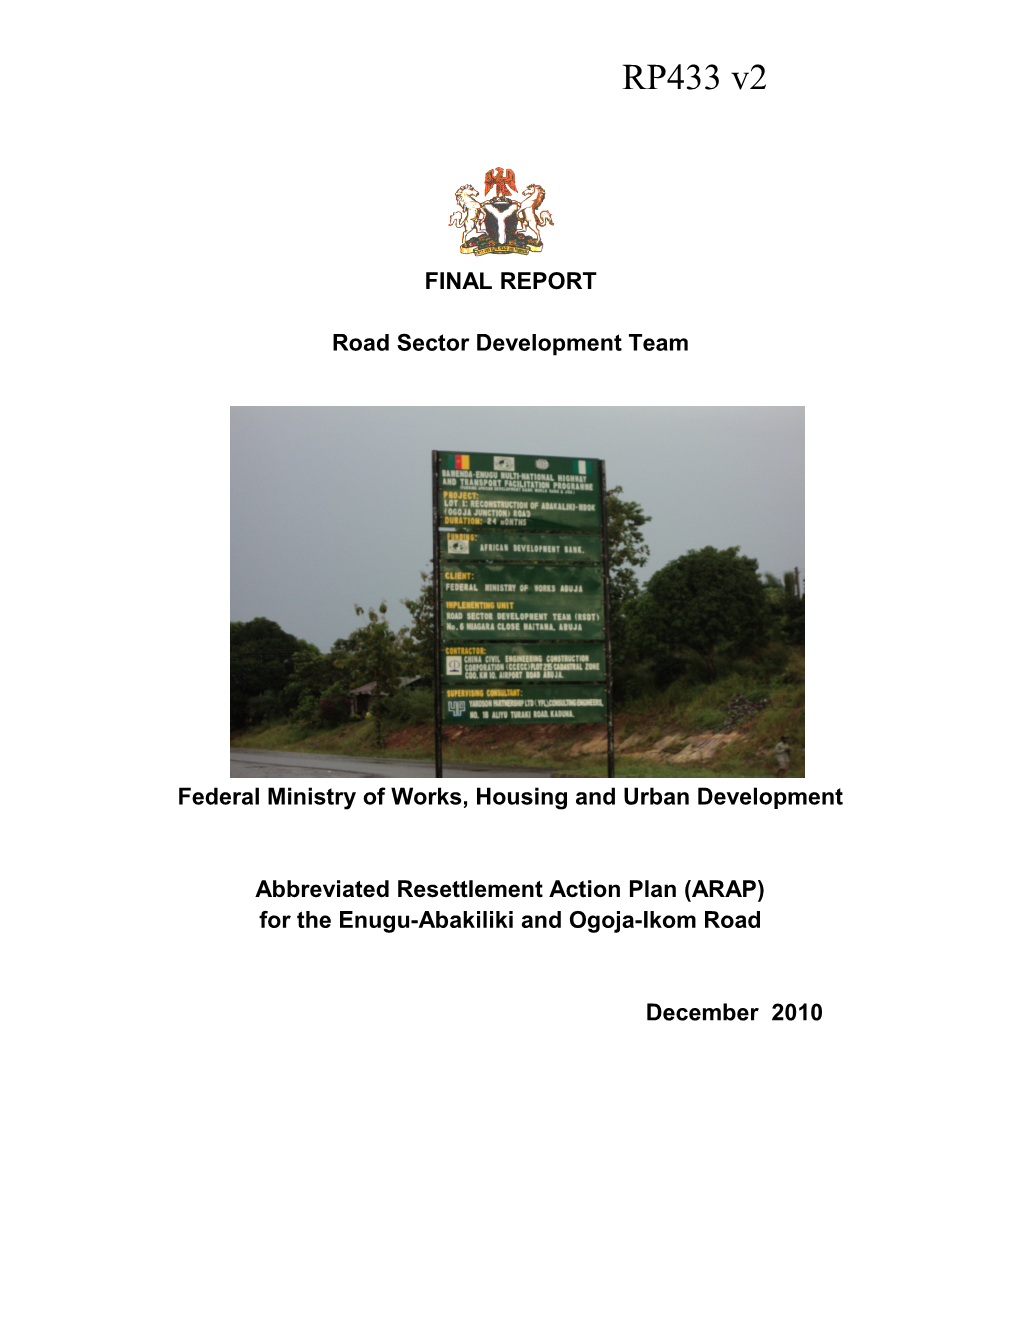 Federal Ministry of Works, Housing and Urban Development